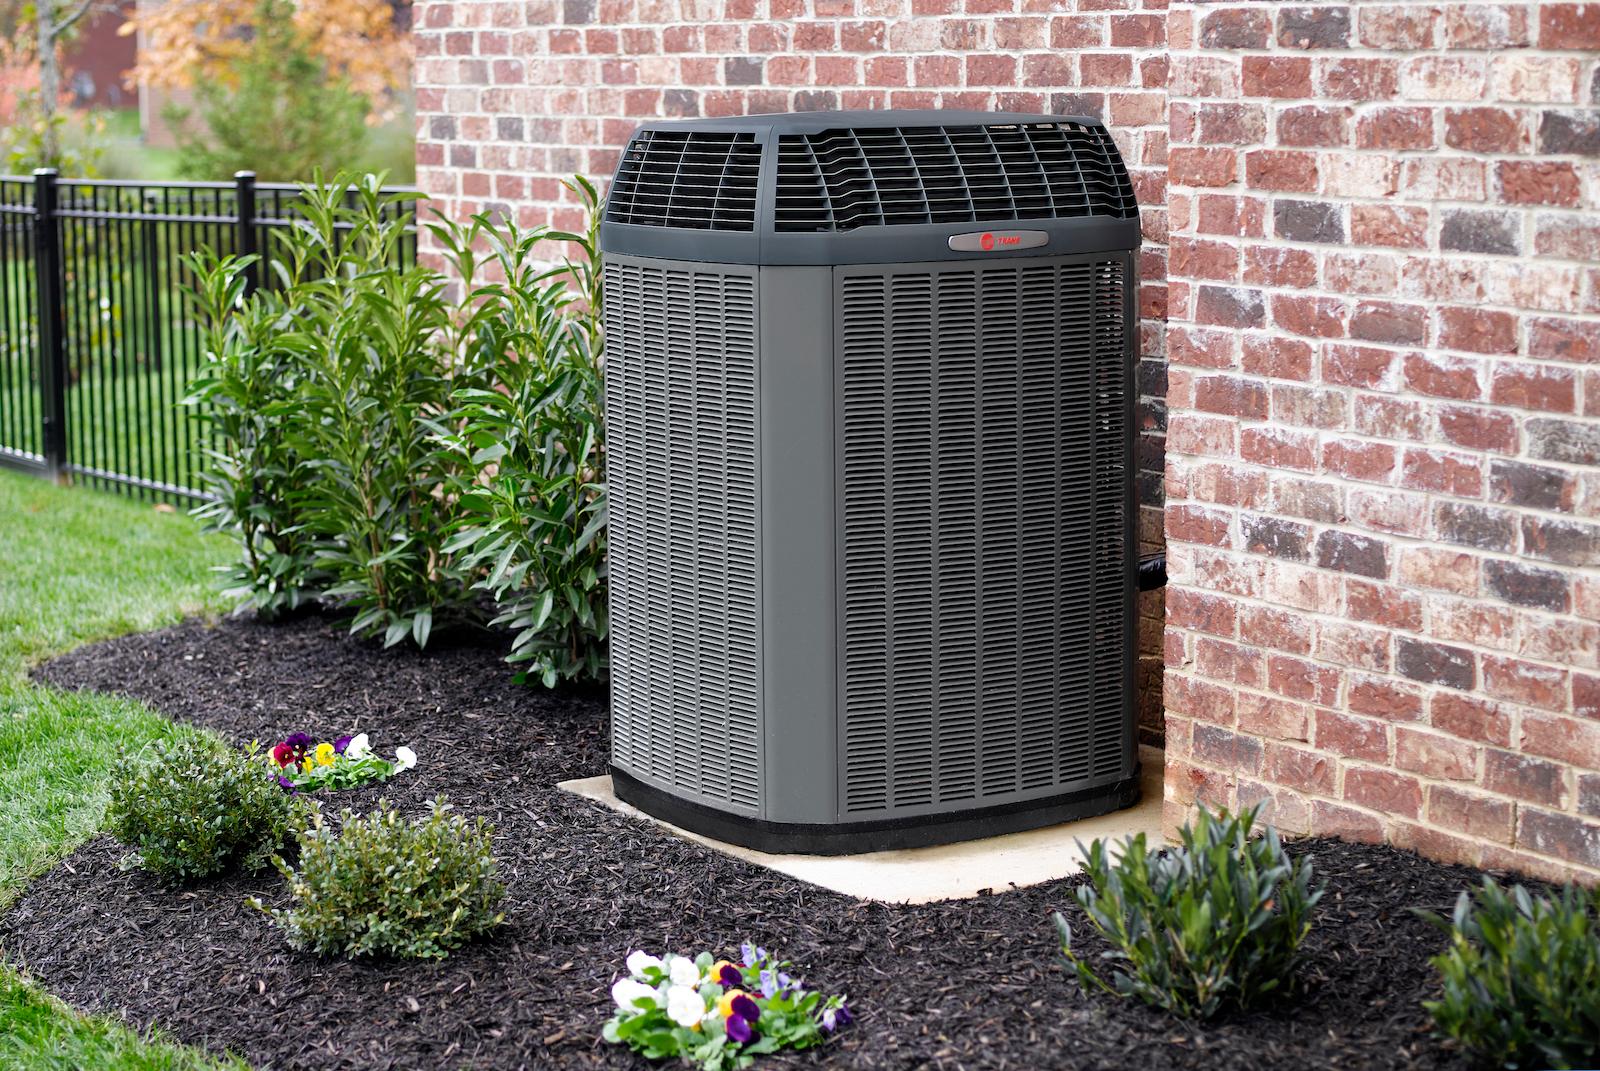 An outdoor Trane HVAC system is nestled between a brick wall and plants.